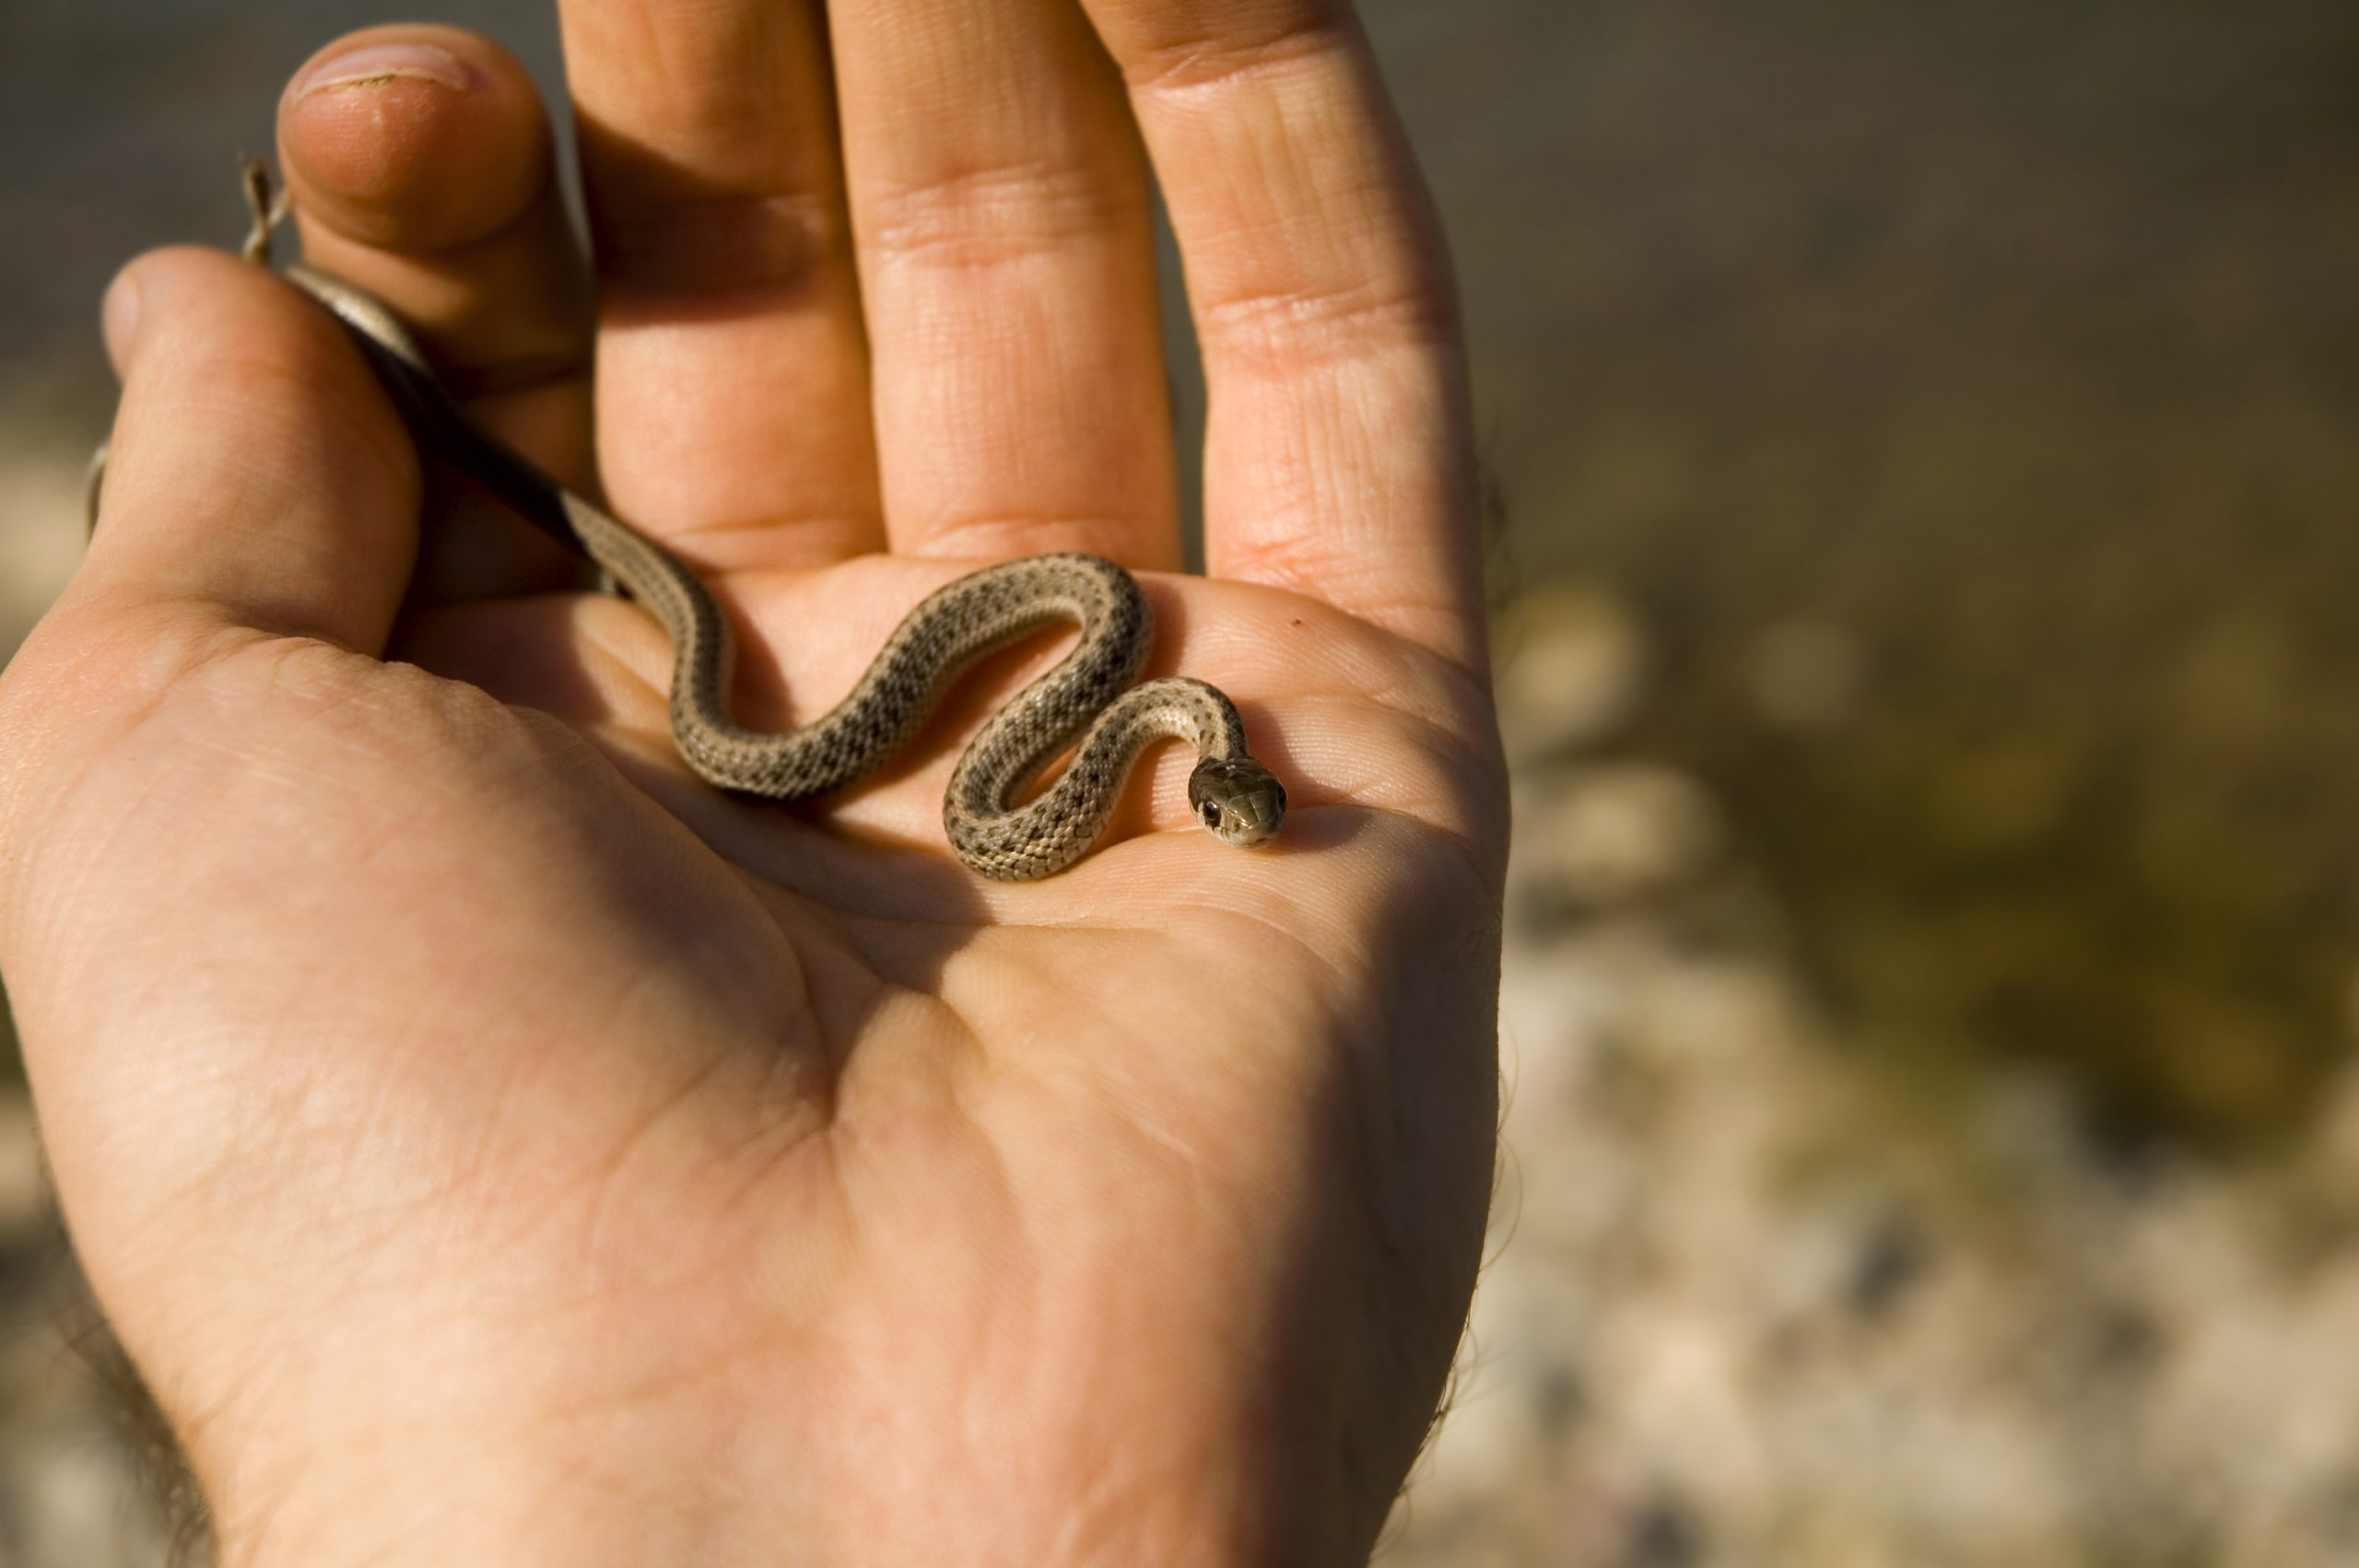 The eastern garter snake is widely distributed throughout the United States and also lives in a variety of habitats.